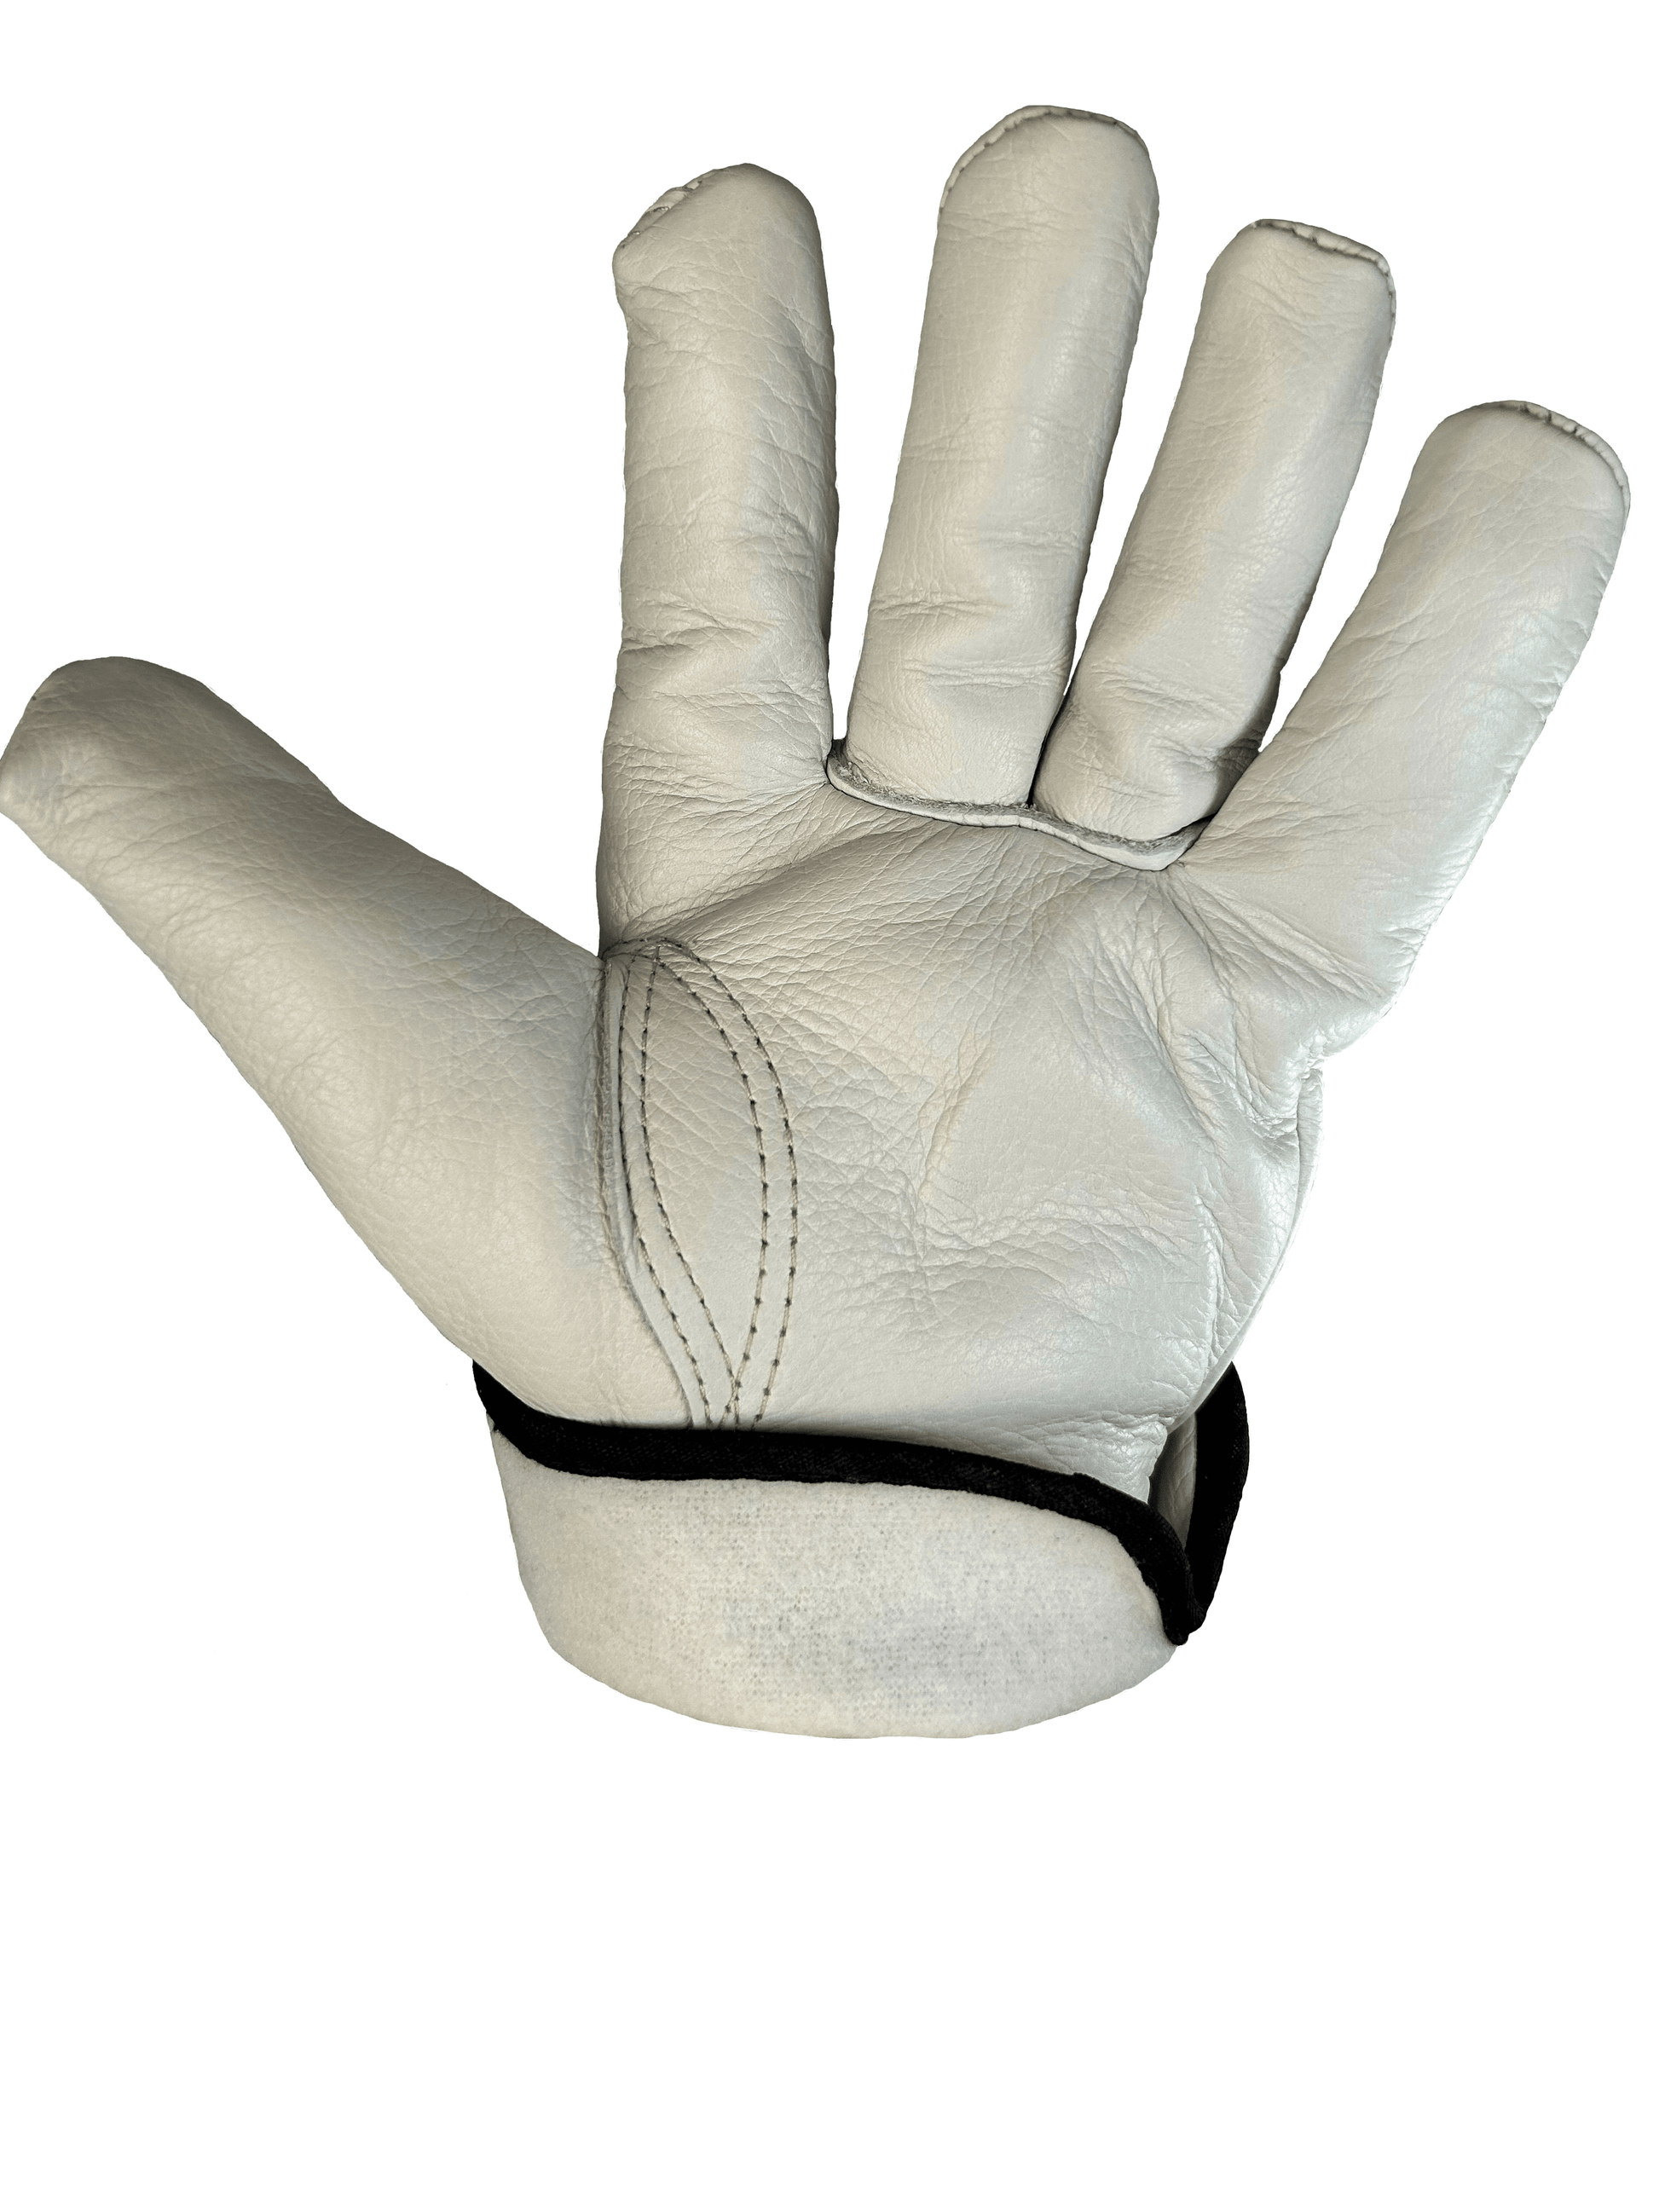 Carhartt A552 - Insulated System 5 Driver Glove Black / S